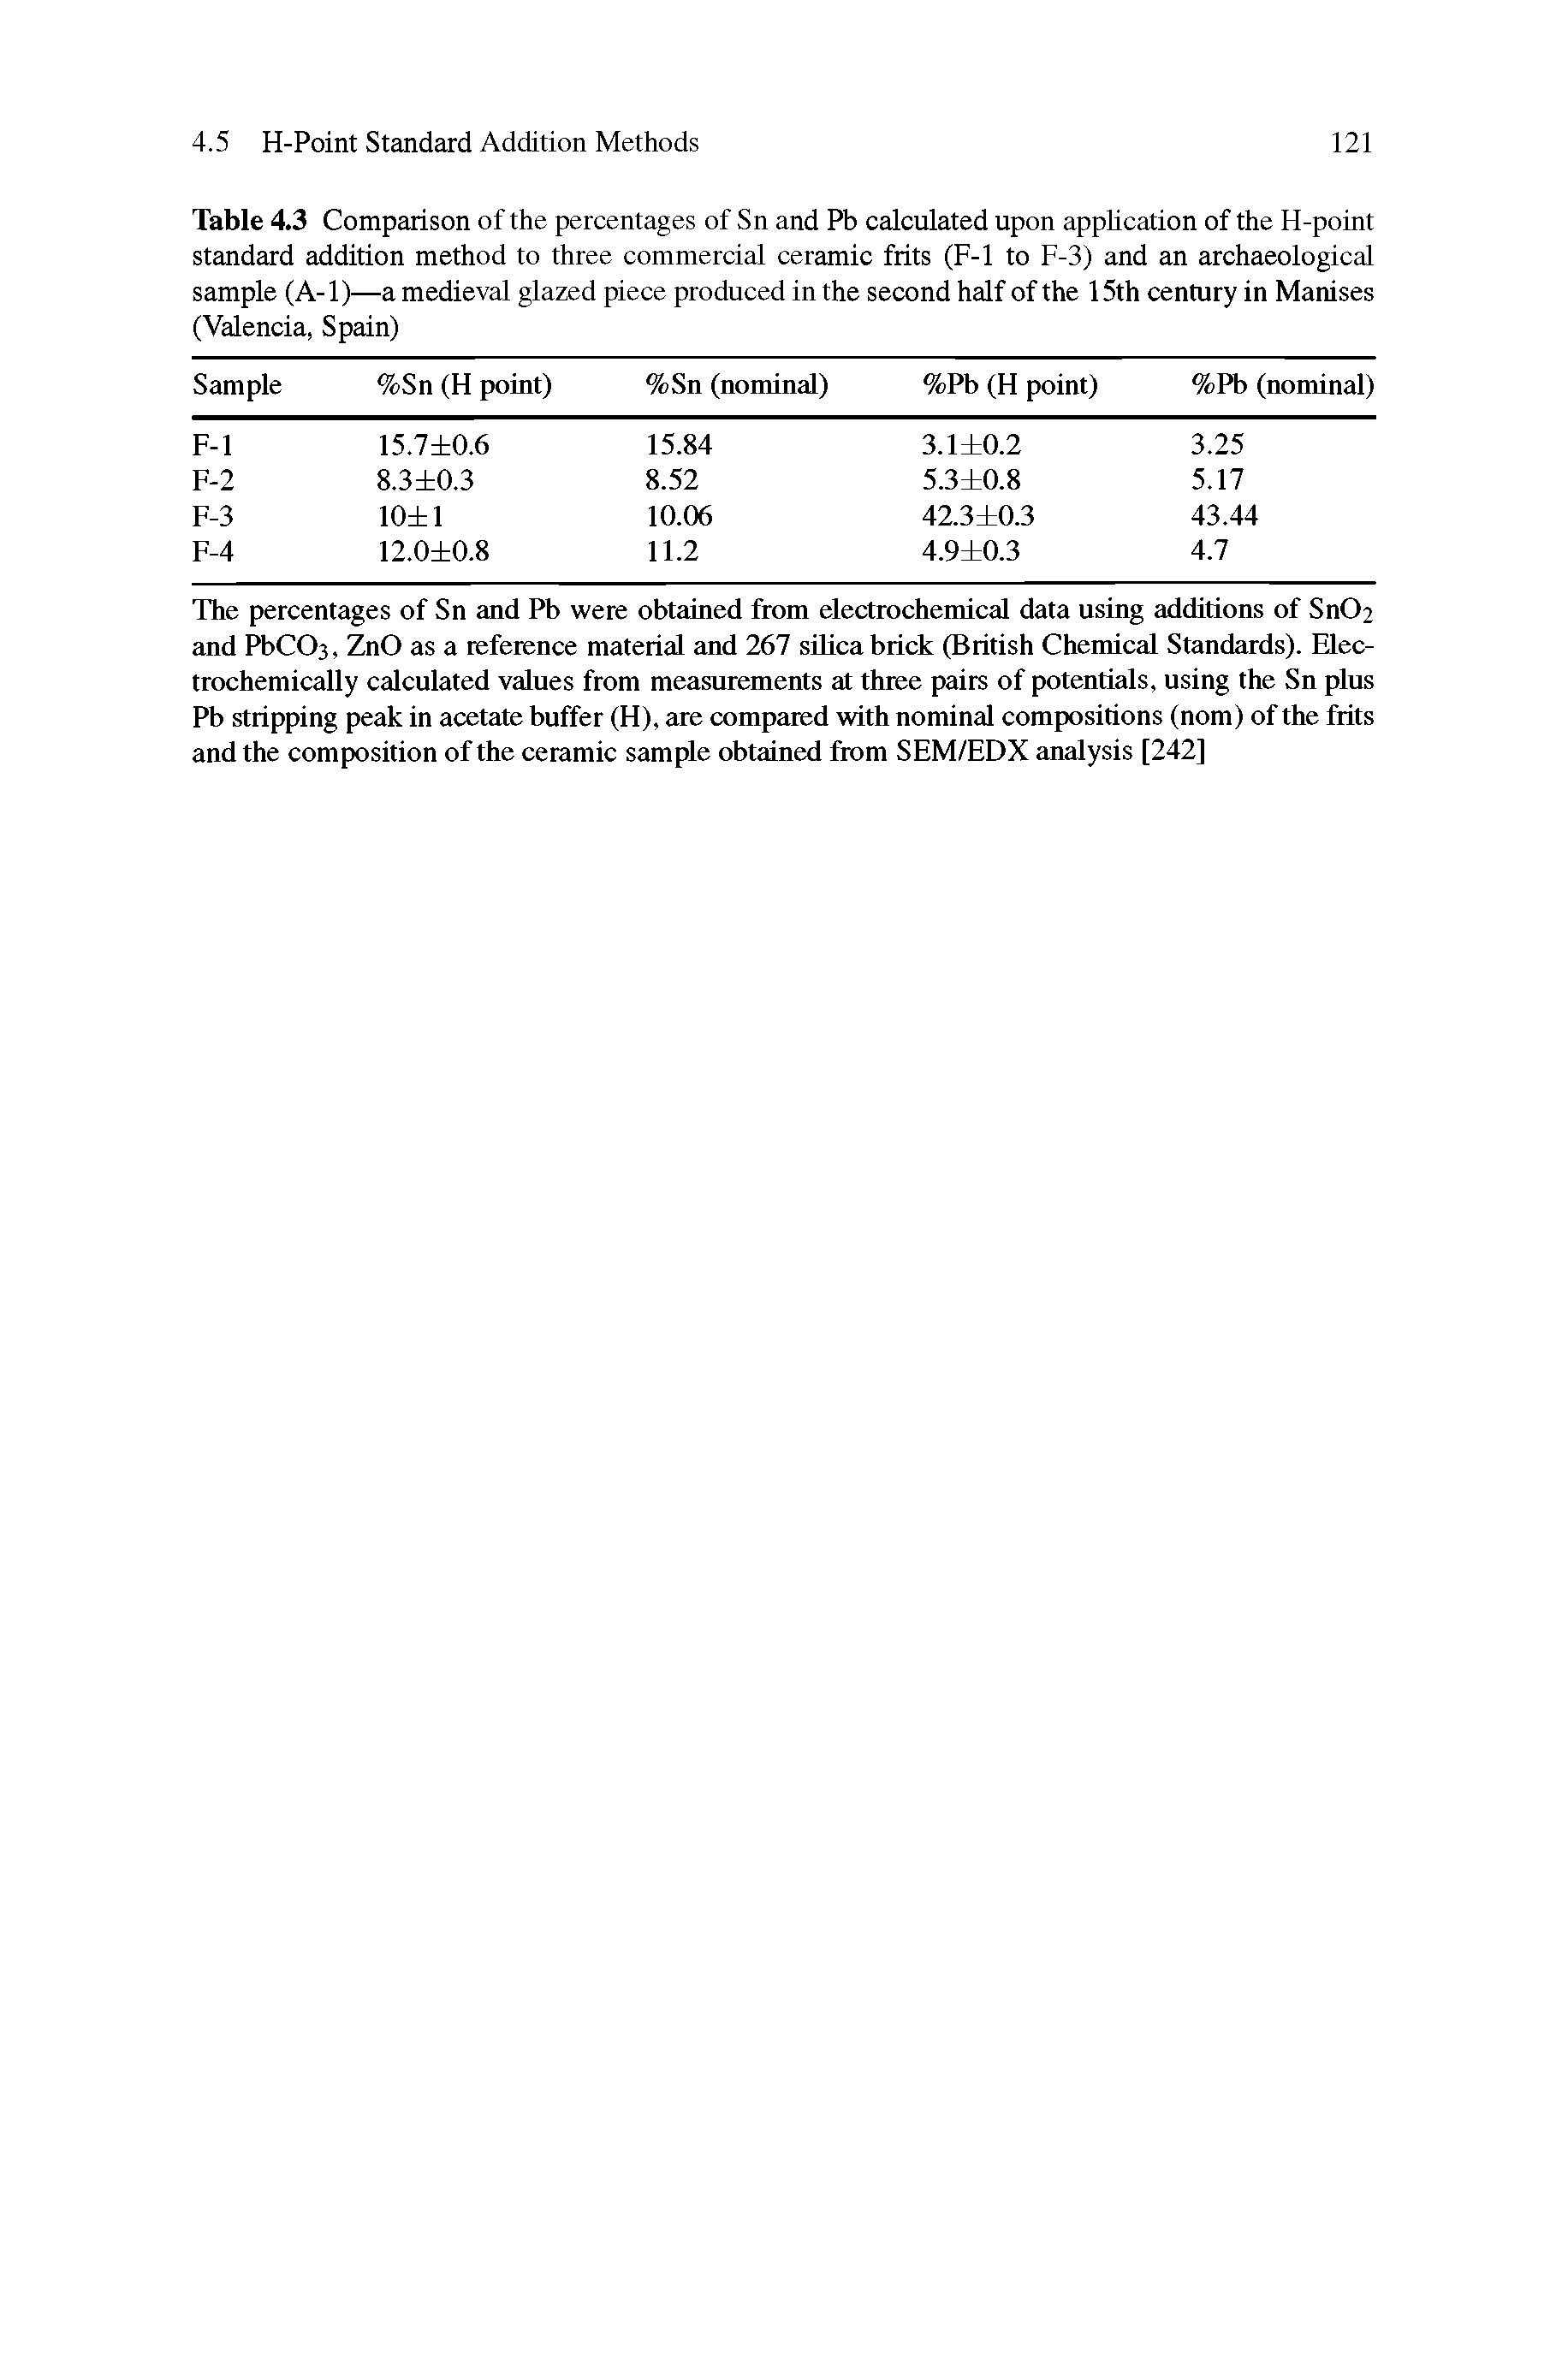 Table 4.3 Comparison of the percentages of Sn and Pb calculated upon apphcation of the H-point standard addition method to three commercial ceramic frits (F-1 to F-3) and an archaeological sample (A-1)—a medieval glazed piece produced in the second half of the 15th century in Manises (Valencia, Spain)...